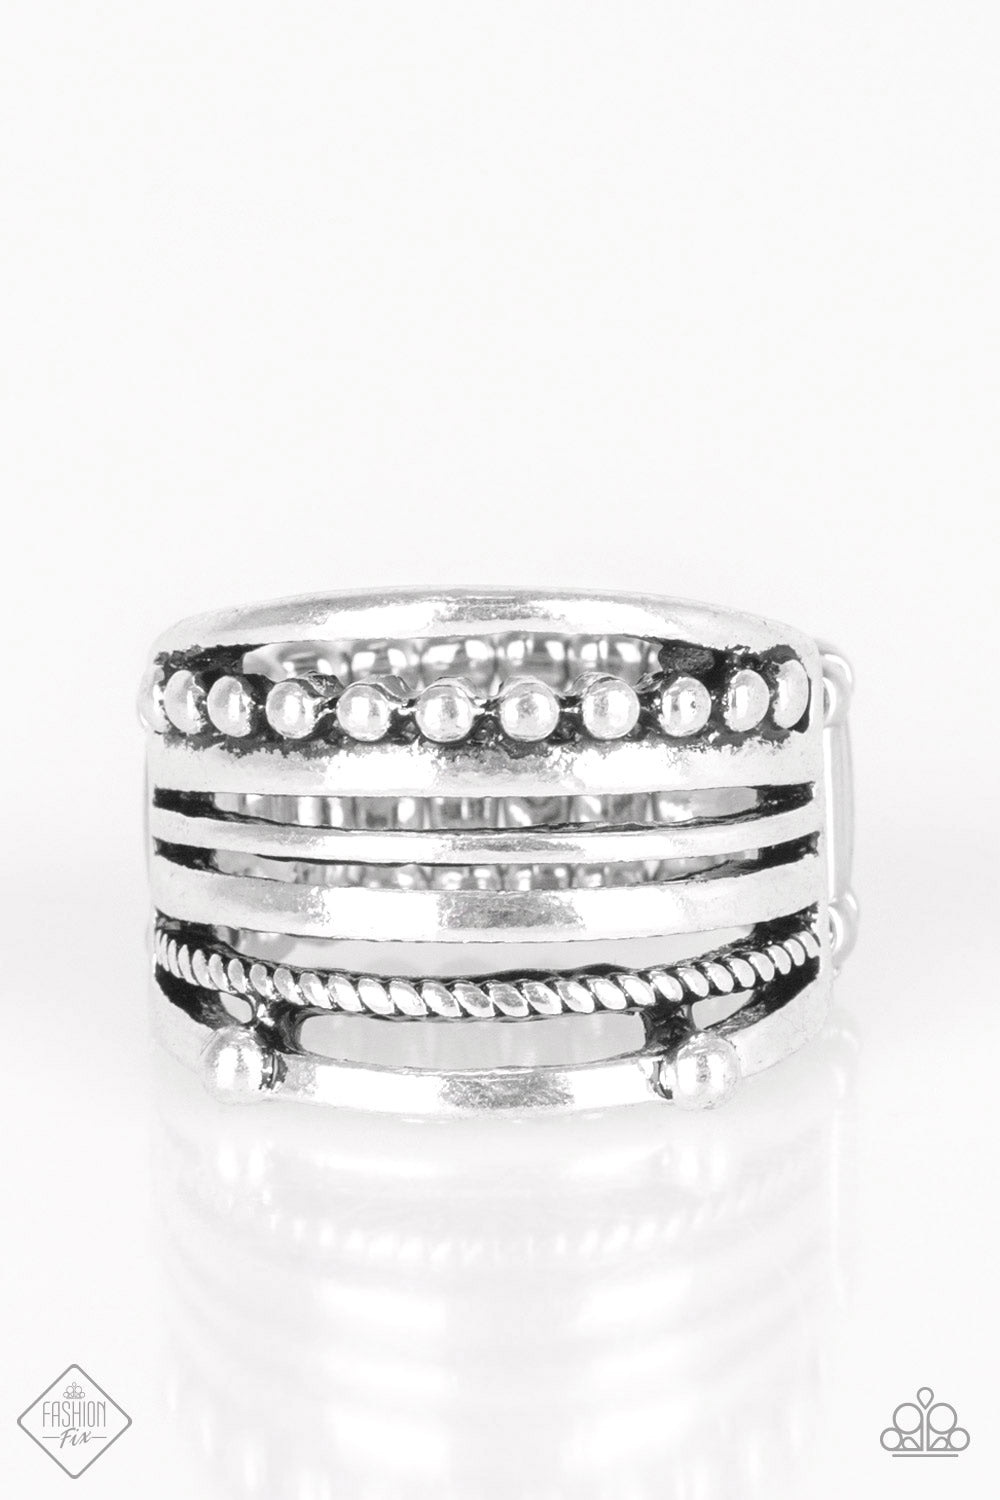 THE STEEL OF NIGHT - SILVER BAND DOTTED TWISTED RING